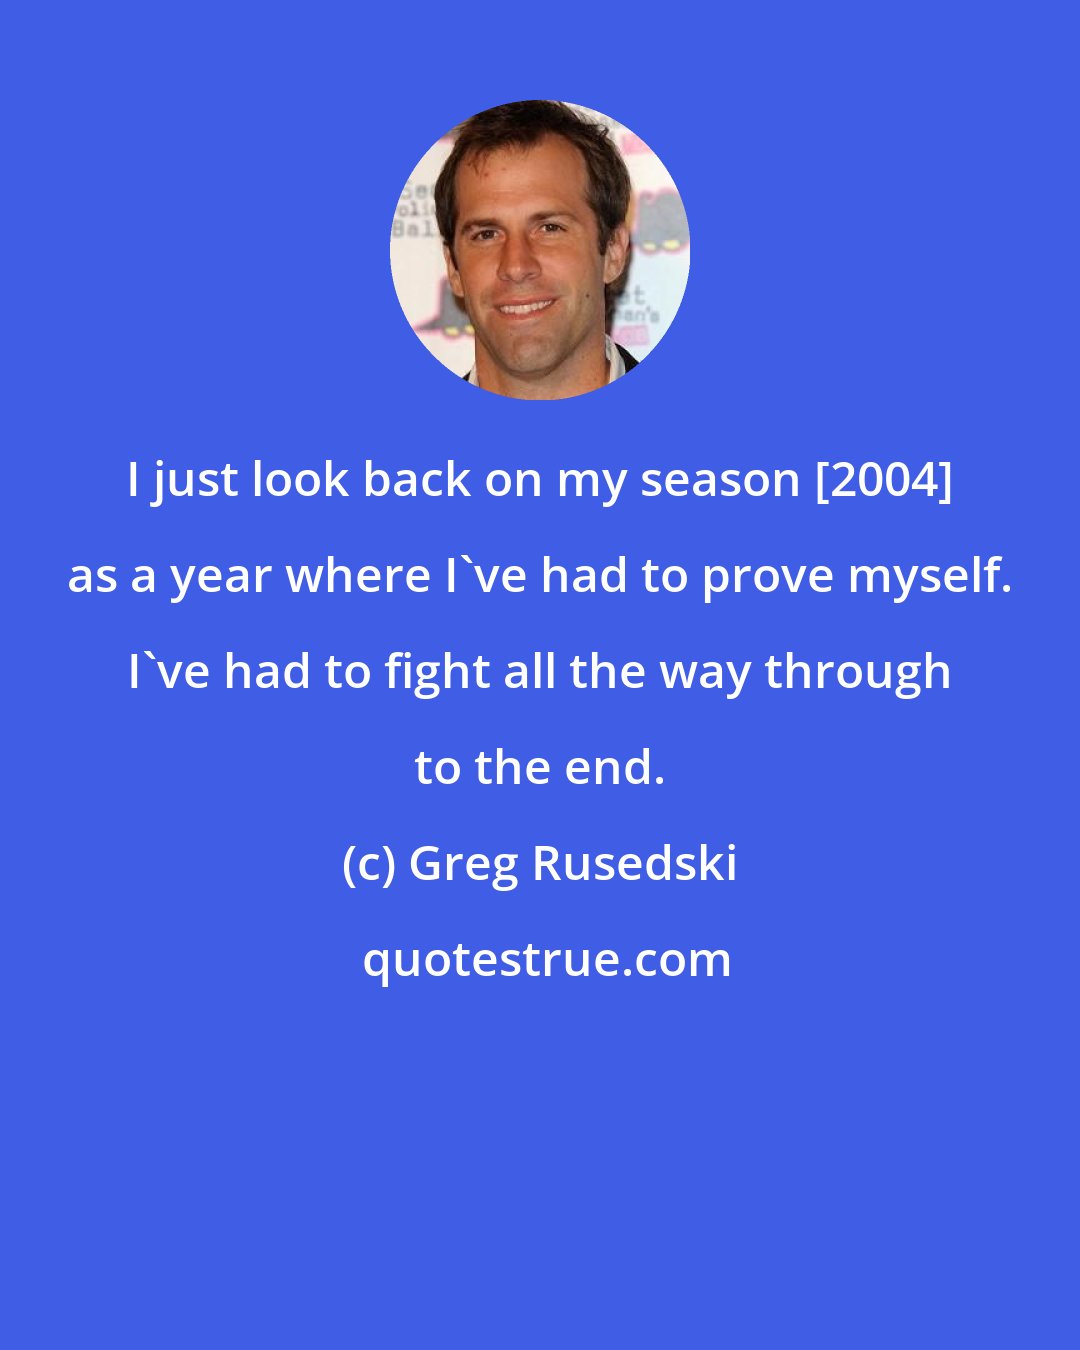 Greg Rusedski: I just look back on my season [2004] as a year where I've had to prove myself. I've had to fight all the way through to the end.